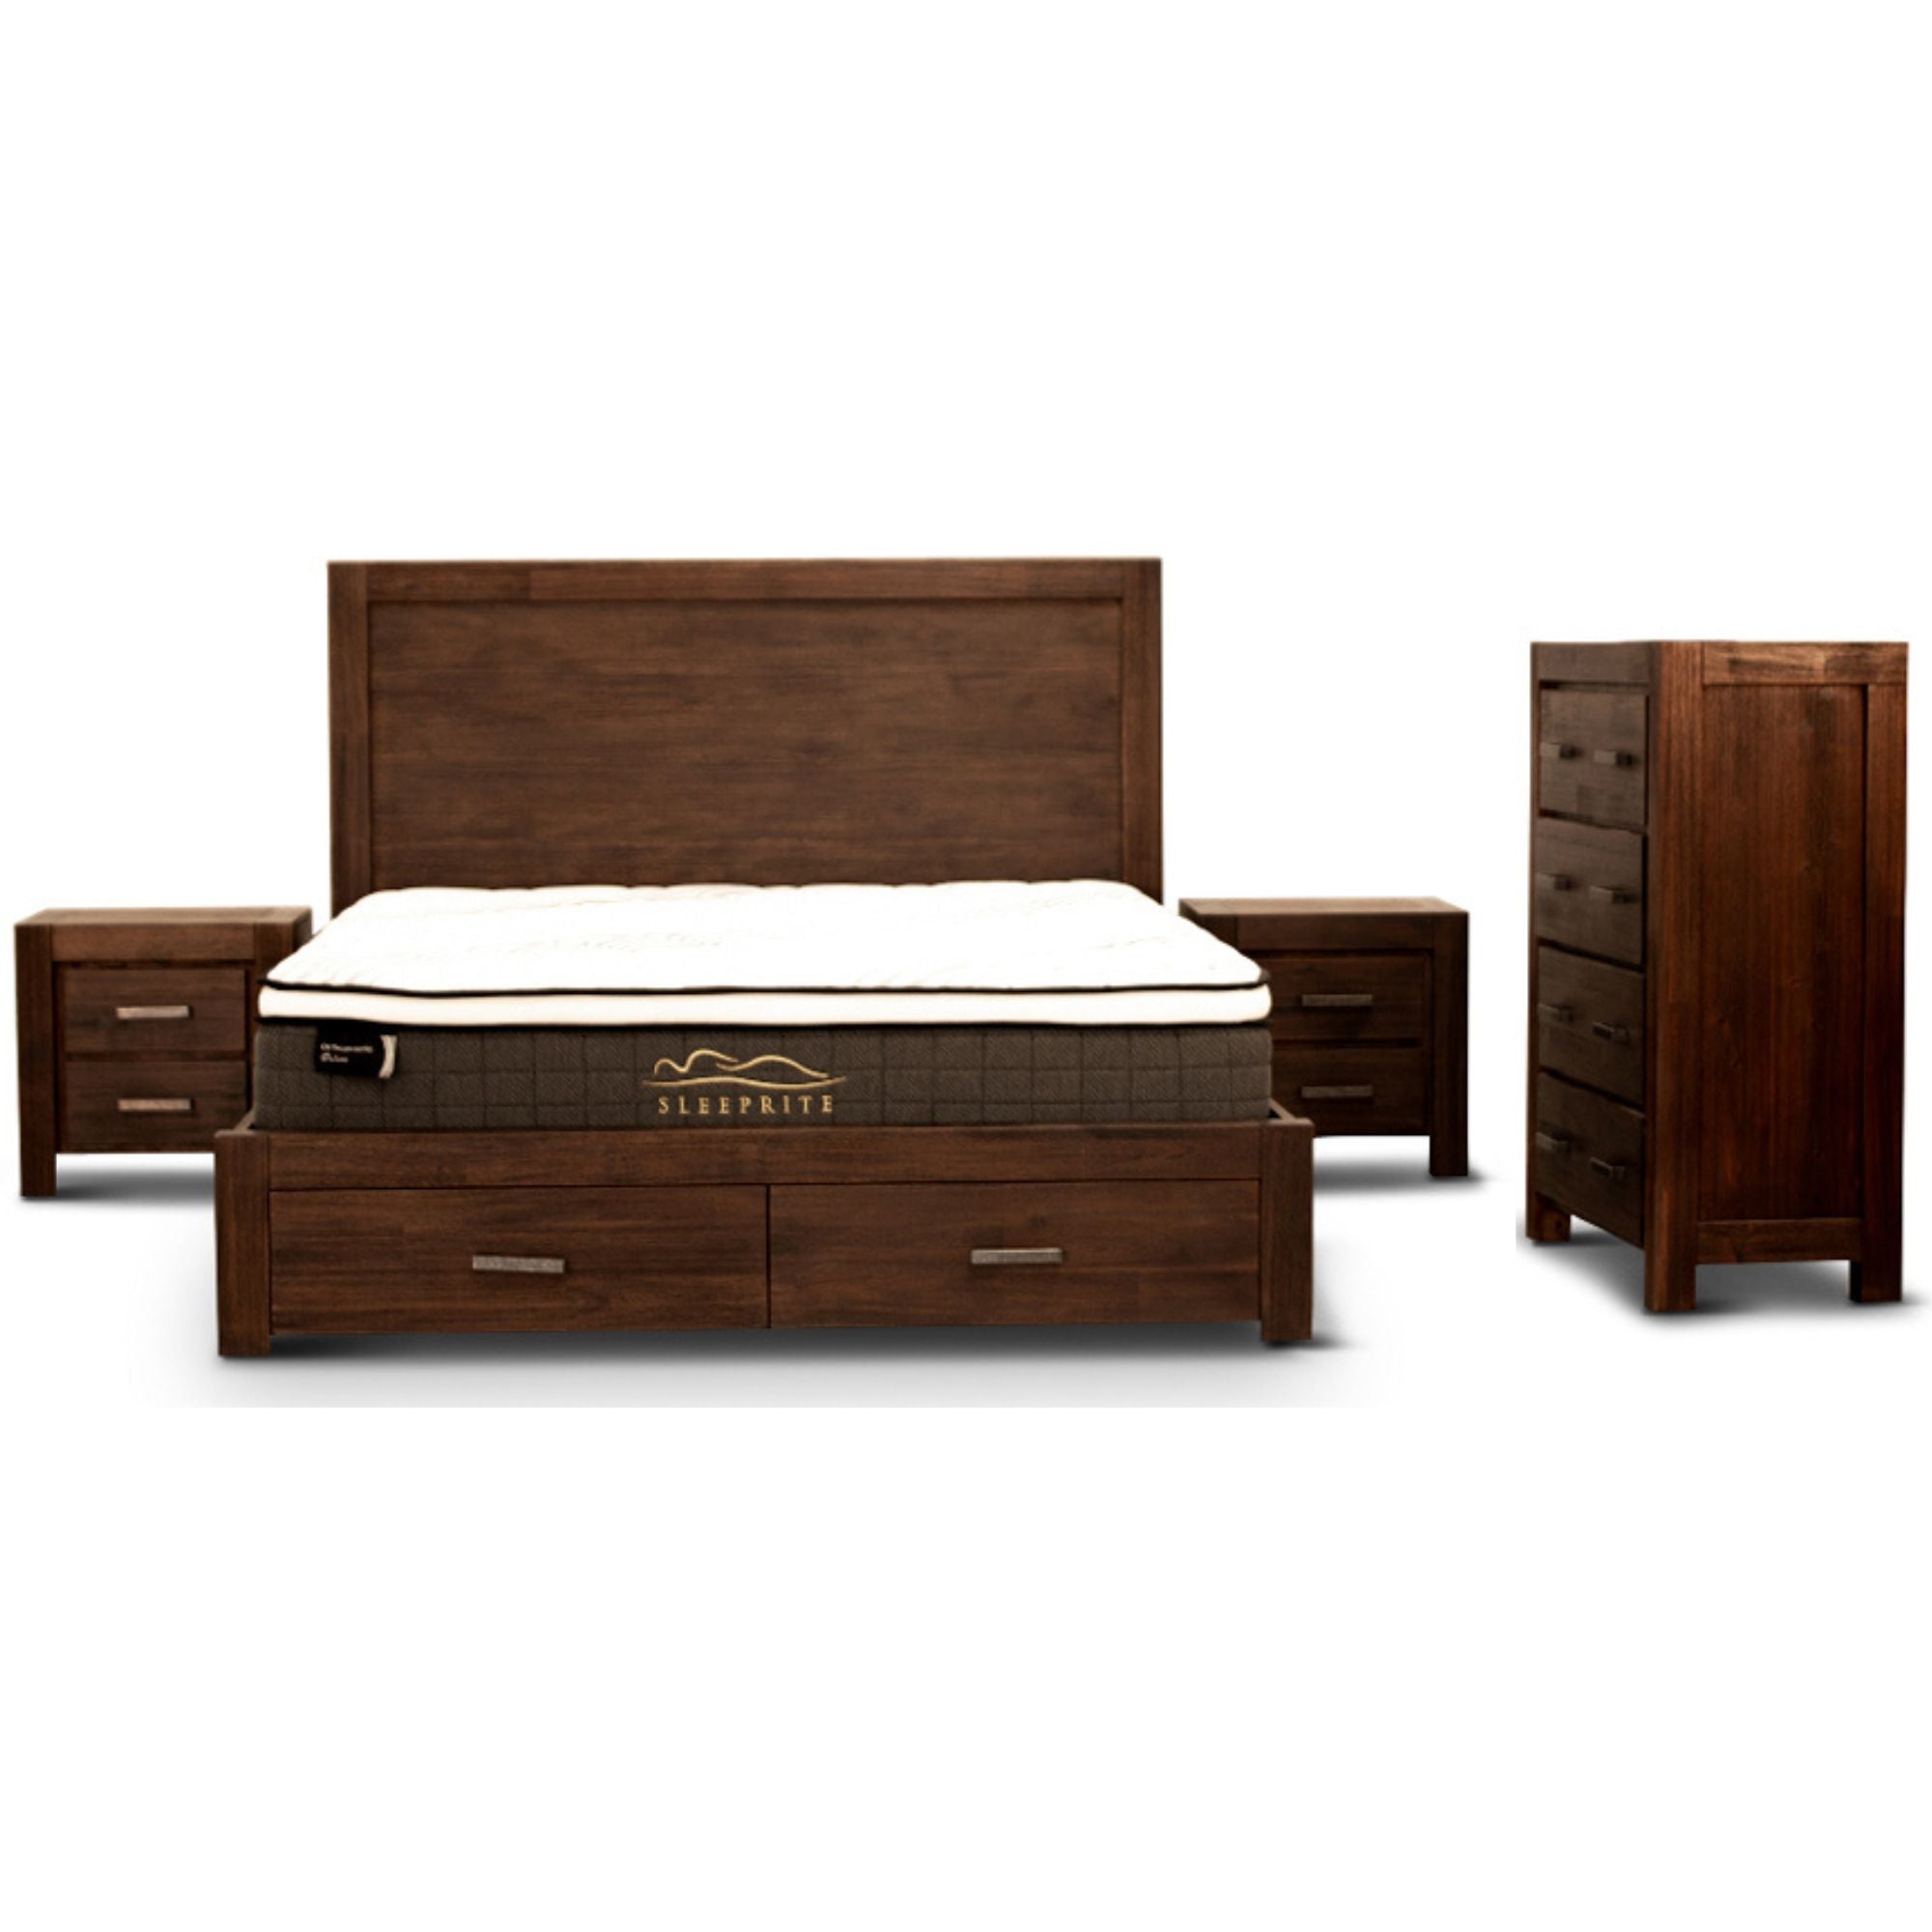 Back In Stock! 4pc King Bedroom Suite With Storage Bed Frame Bedside Tables and Tallboy  - Walnut